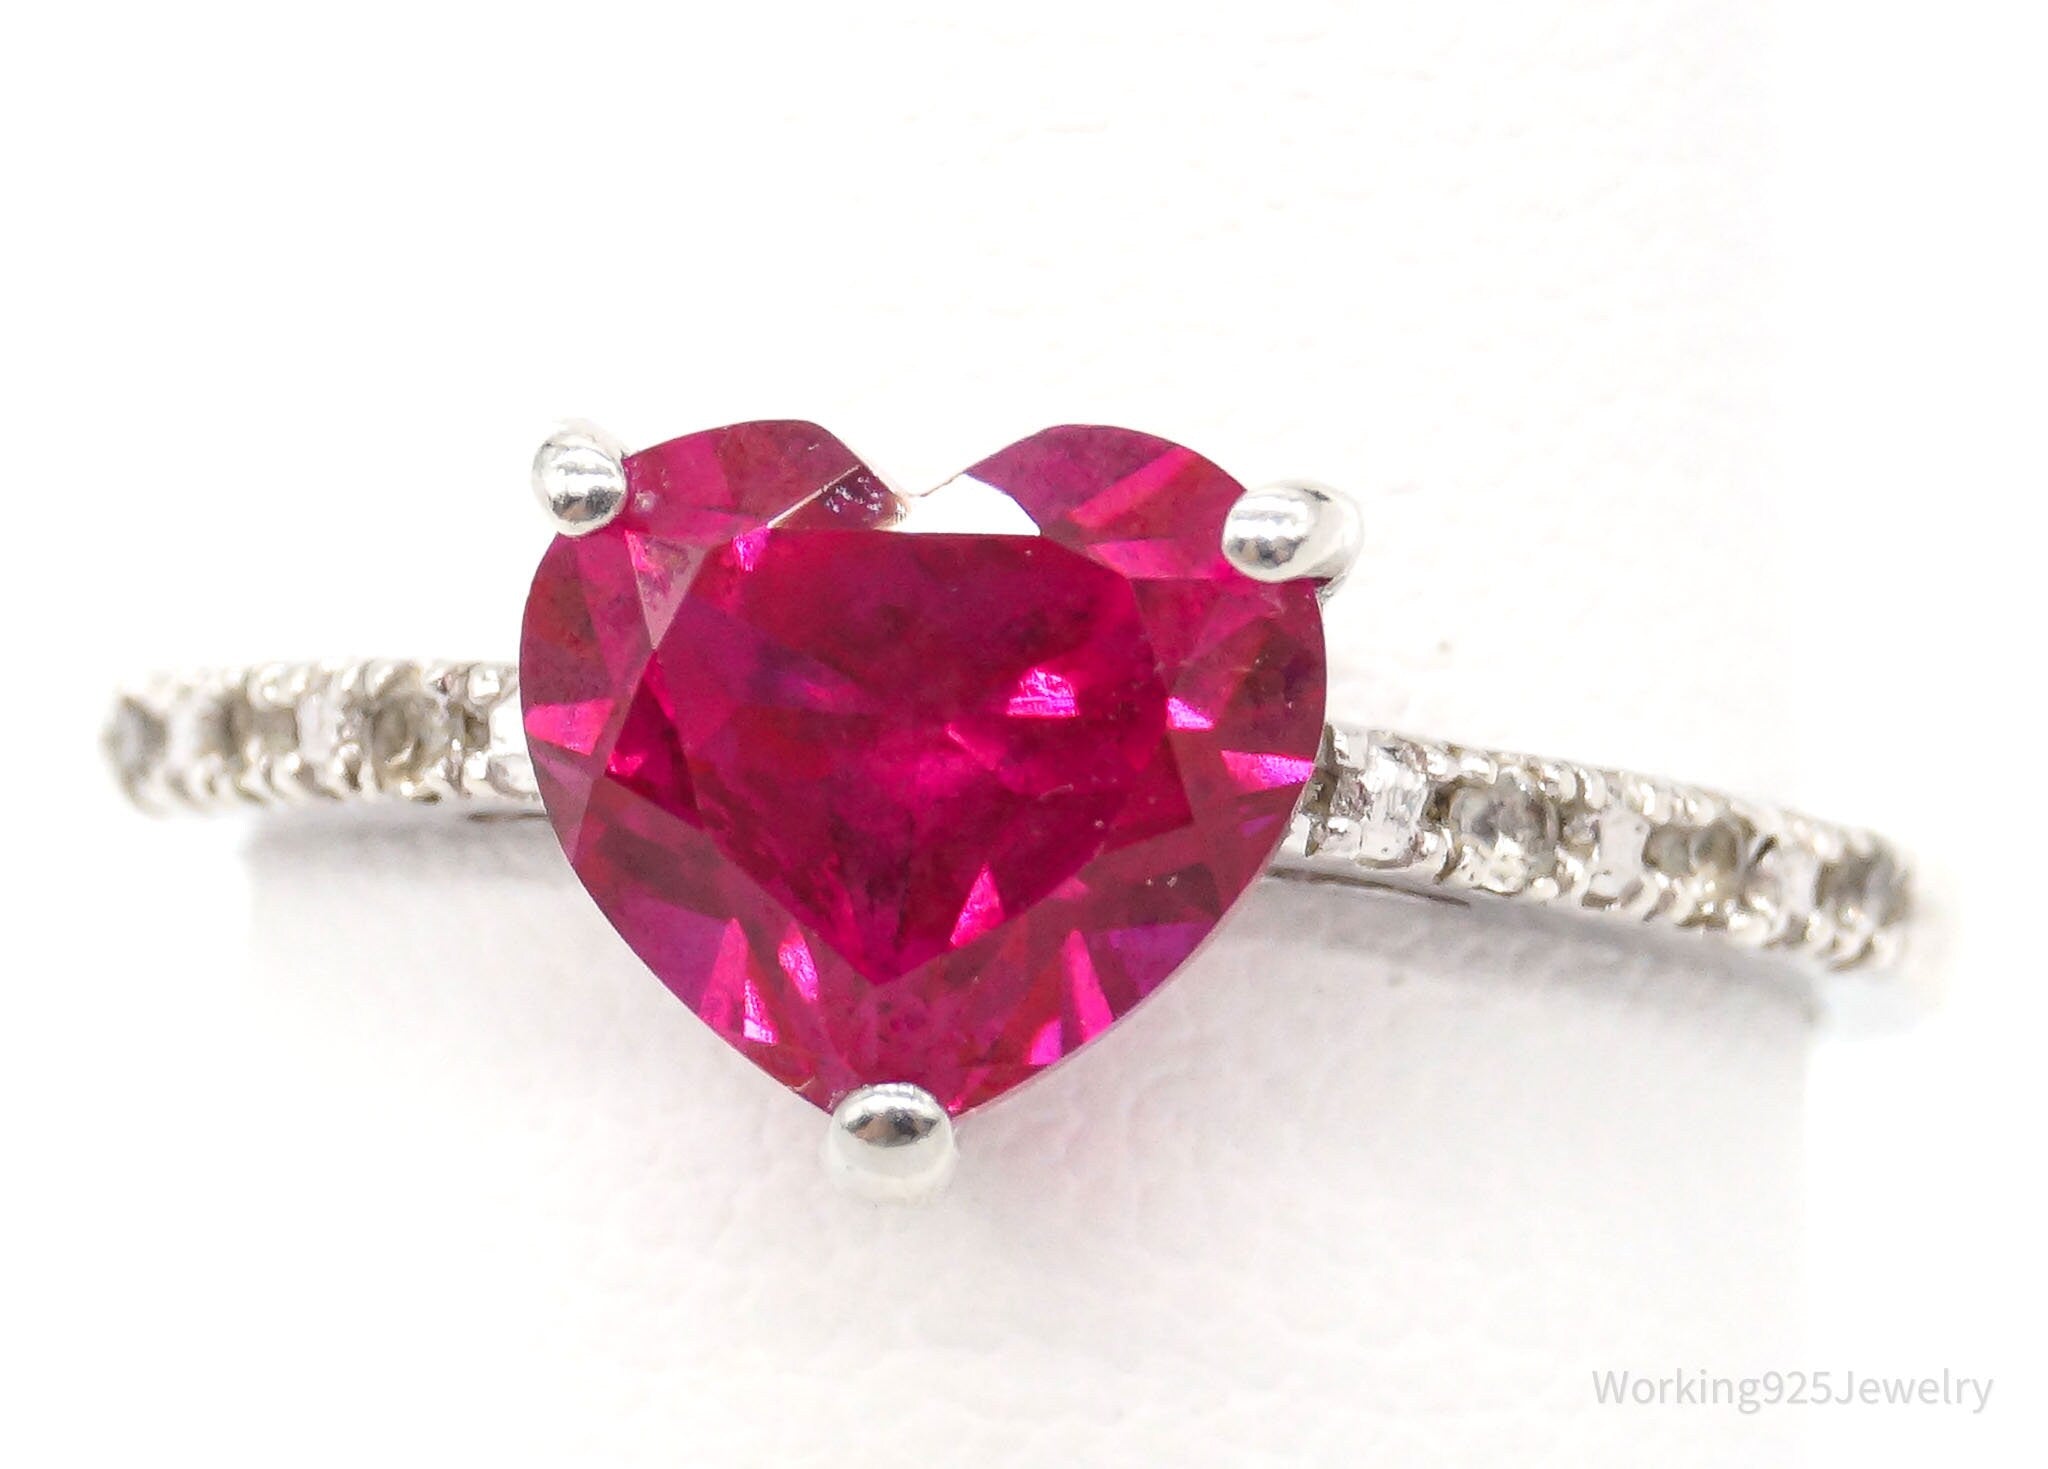 Vintage Ruby Heart Cubic Zirconia Sterling Silver Ring - Size 6.75